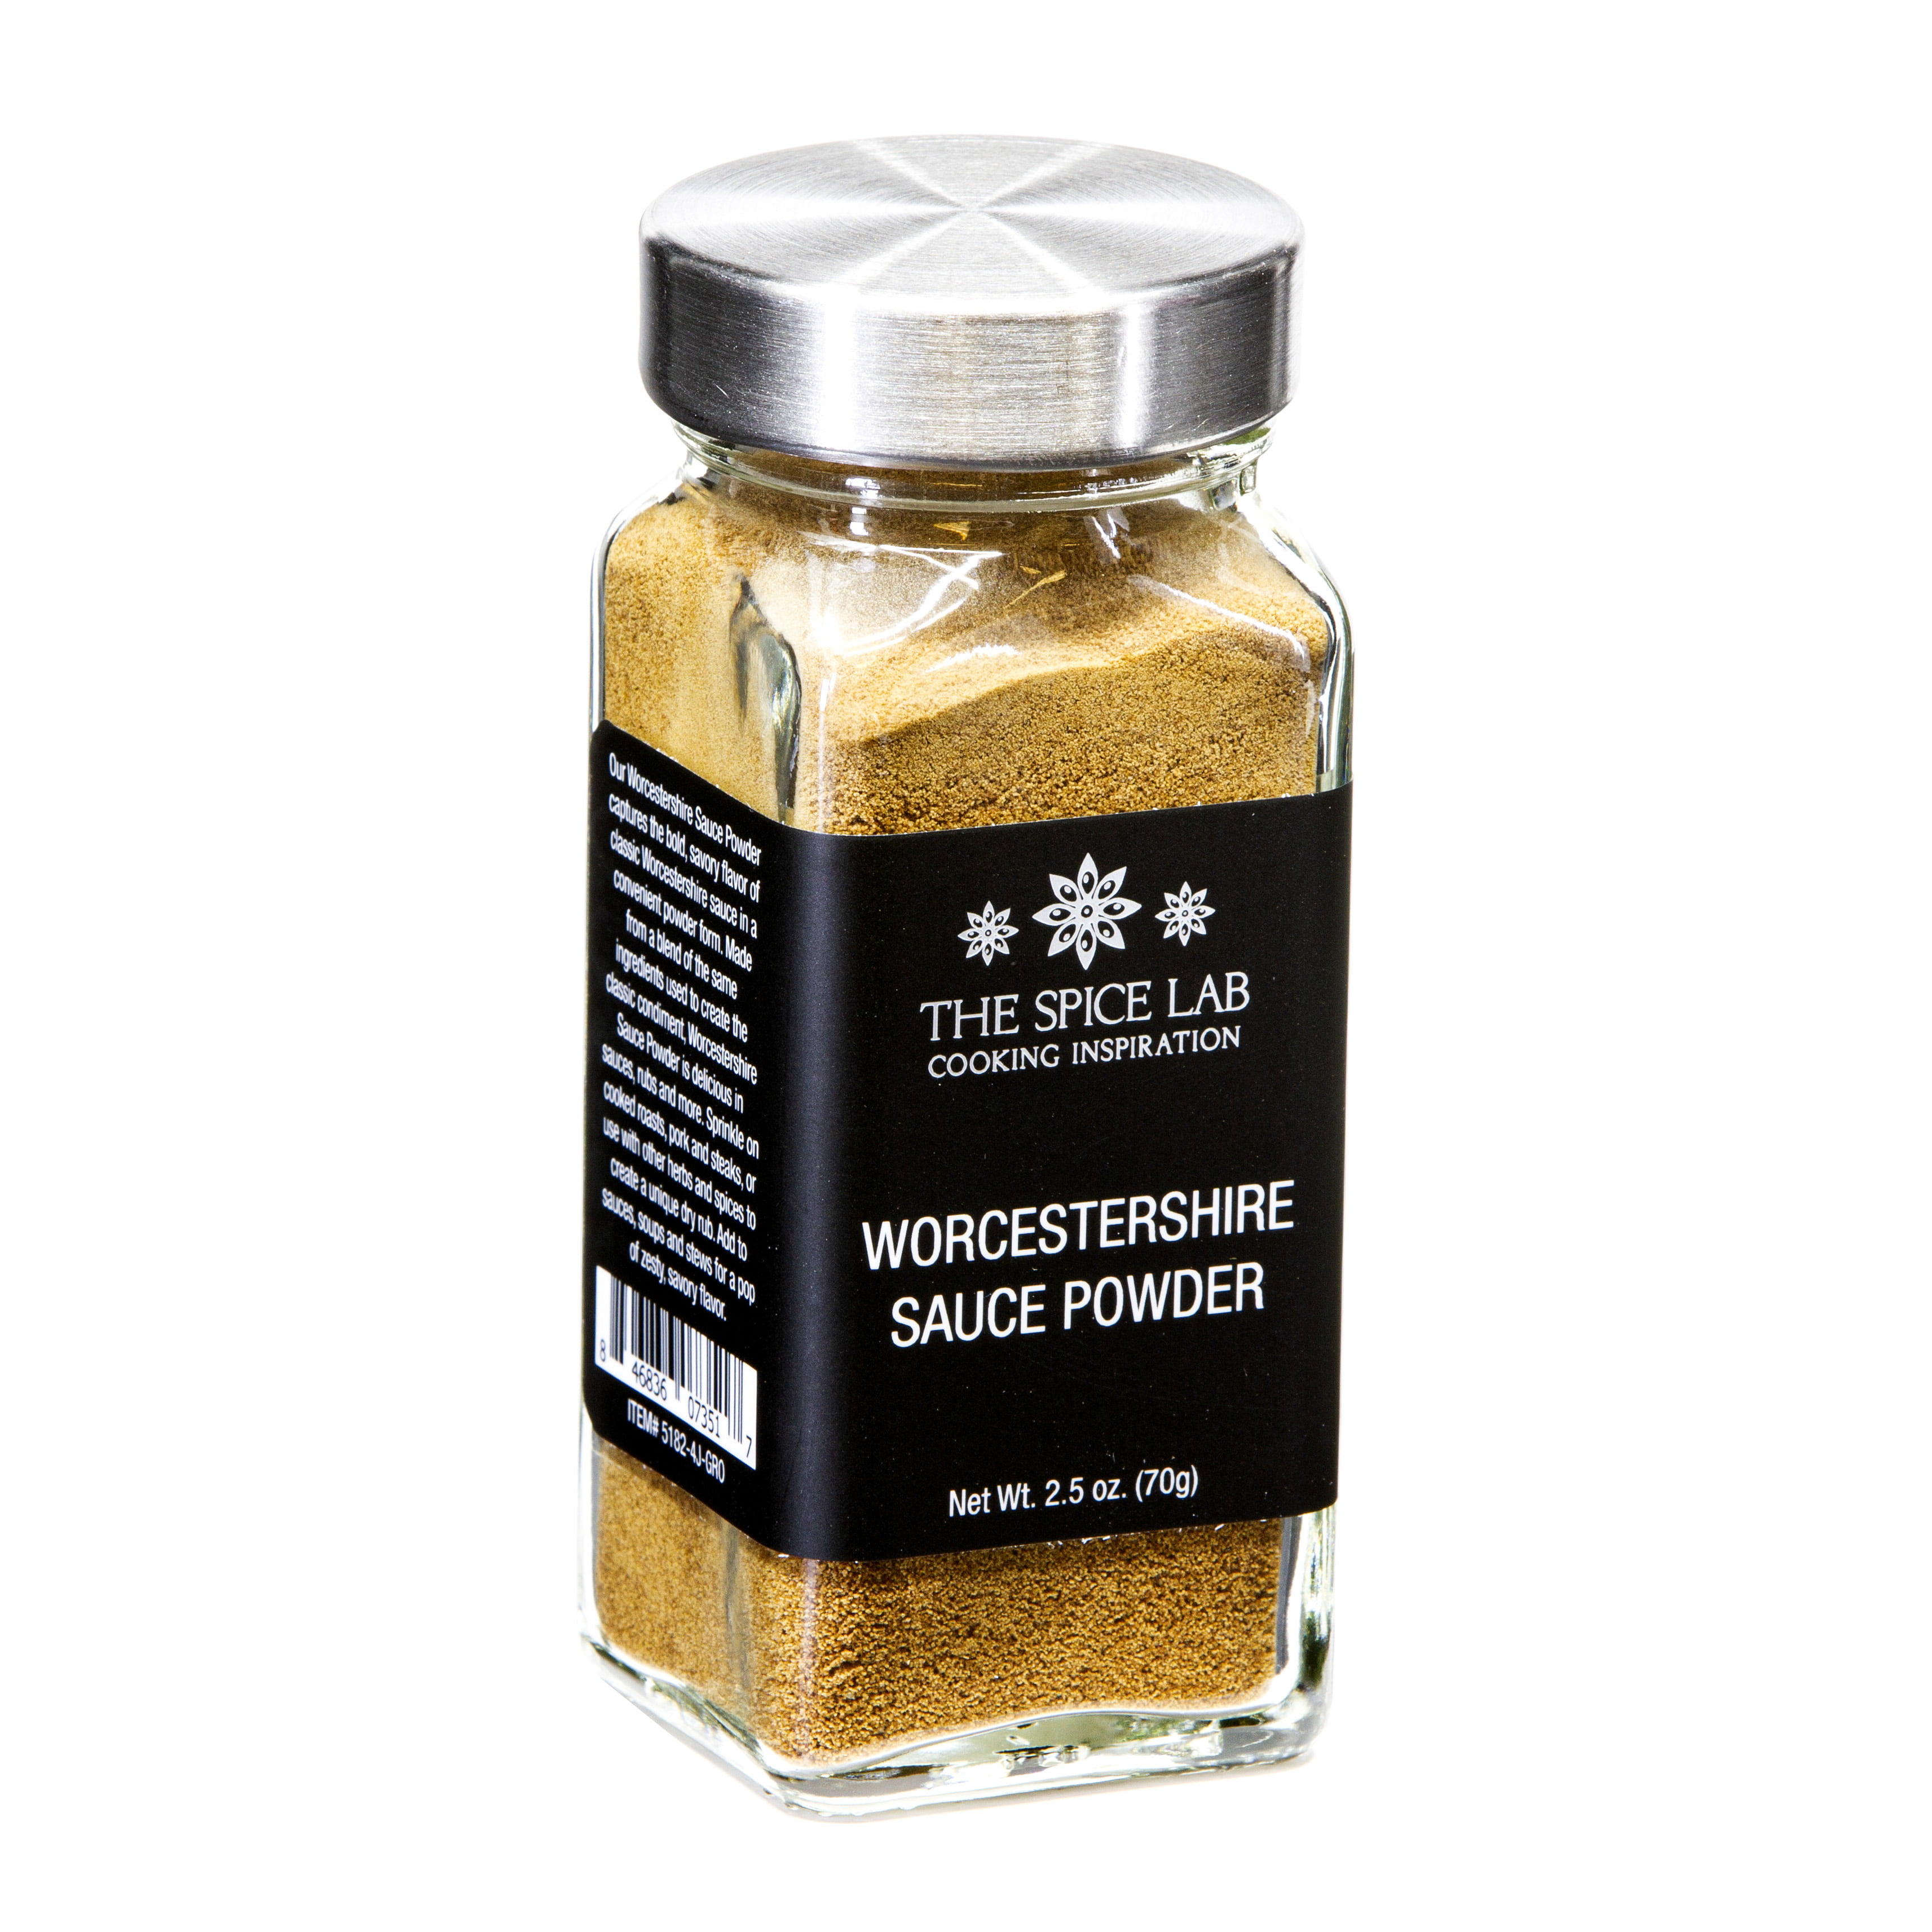 The Spice Lab Worcestershire Powder - Made from Real Worcestershire Sauce  Powder - 2.5 oz. - Chef's Secret Ingredient - Meats for Umami Powder Flavor  - Kosher Gluten Free Non GMO - French Jar - 5182 - Walmart.com